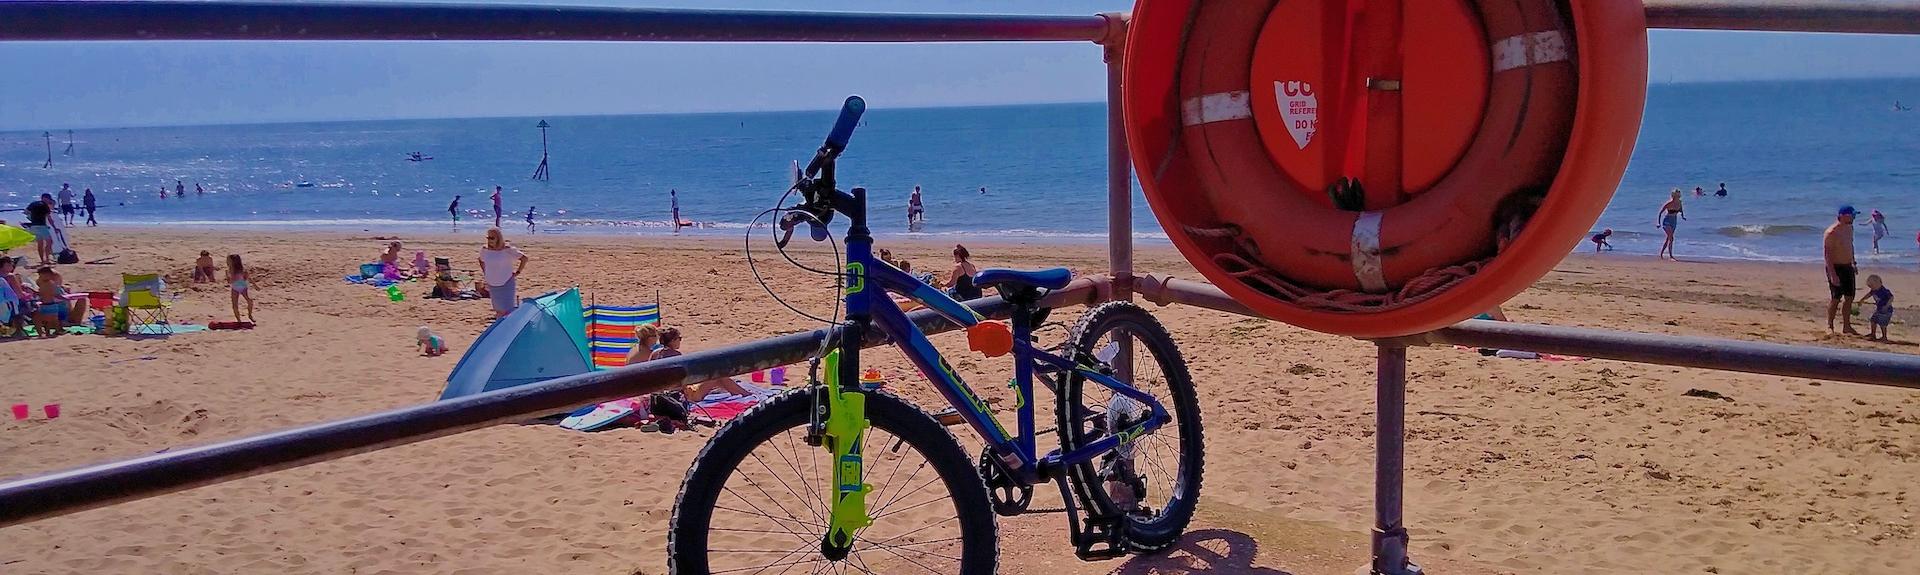 A bicycle is tethered to a railing alongside a life buoy overlooking a large sandy beach on which people are sunbathing. 